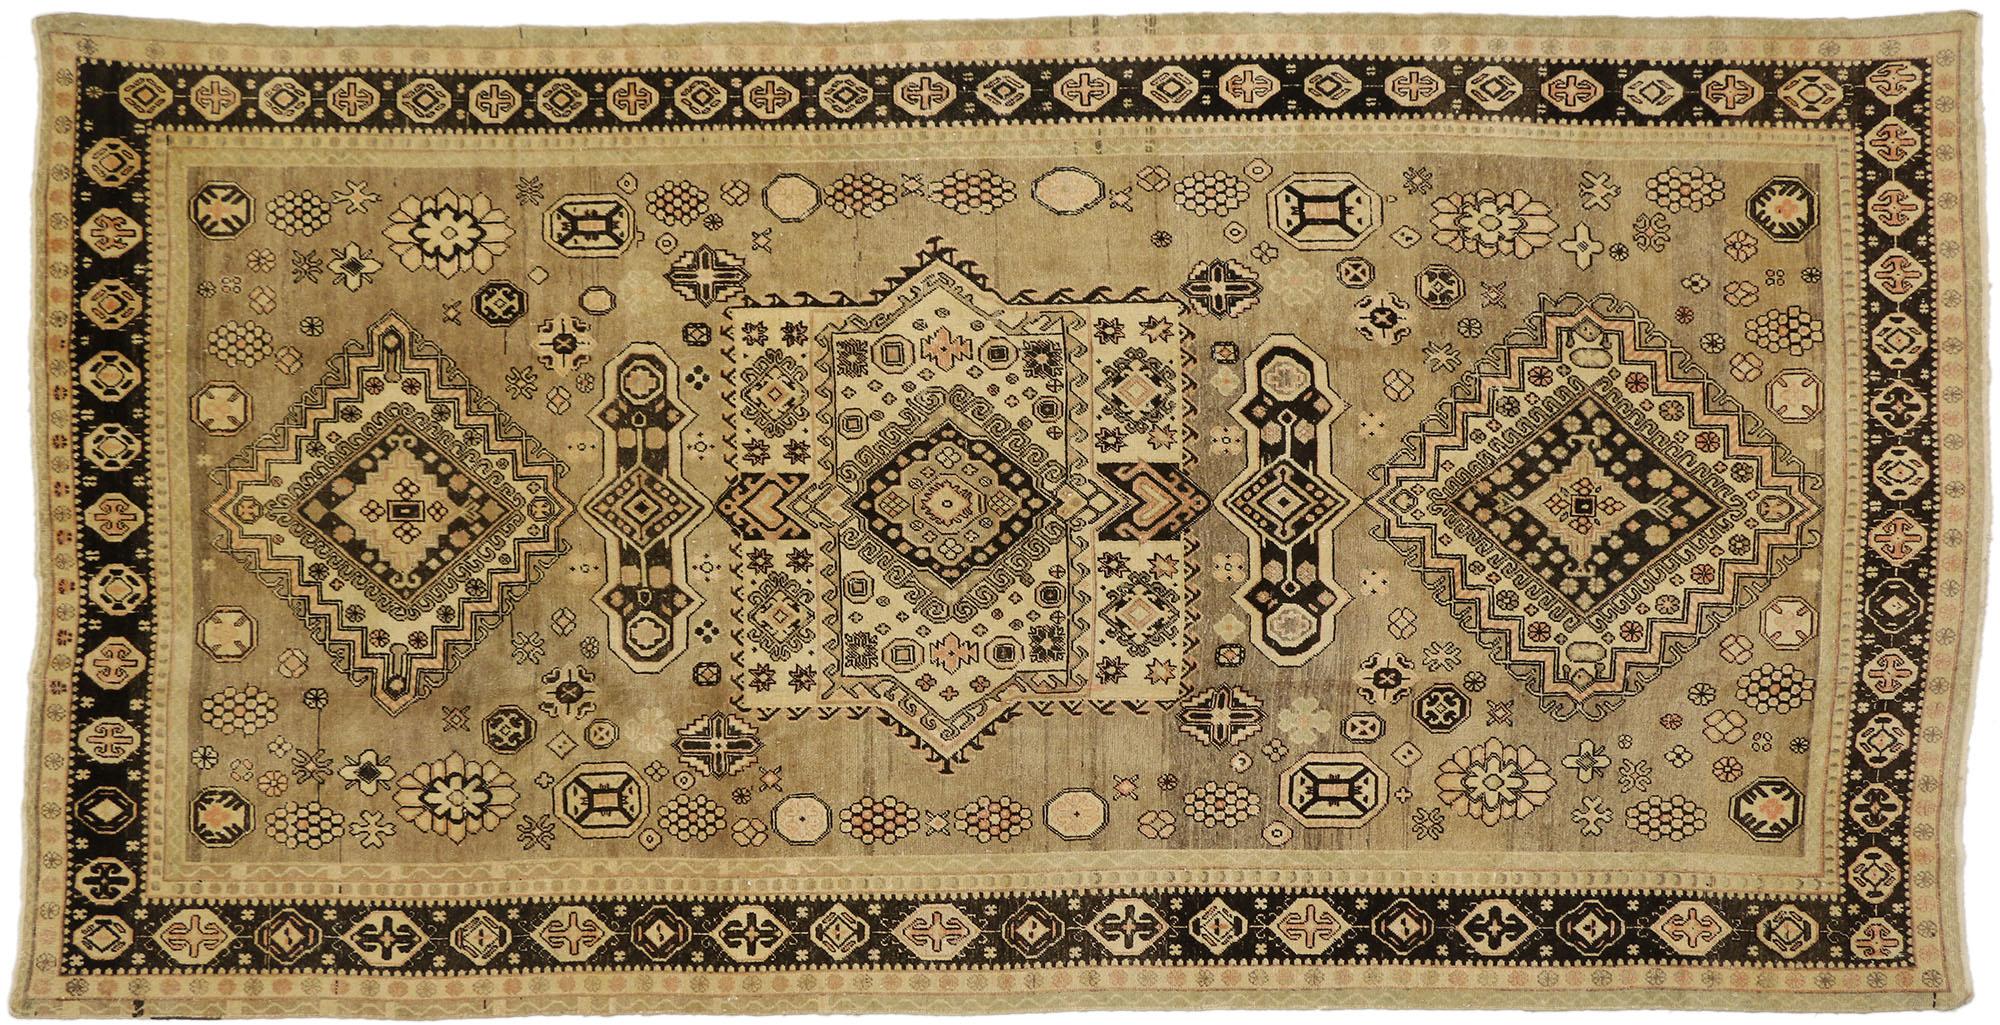 73806 Antique Khotan Pictorial Gallery Rug with Mid-Century Modern Tribal Style 06'09 x 13'02. Warm and inviting with nomadic vibes, this hand-knotted wool antique Pictorial gallery rug beautifully embodies a Mid-Century Modern Tribal style. The